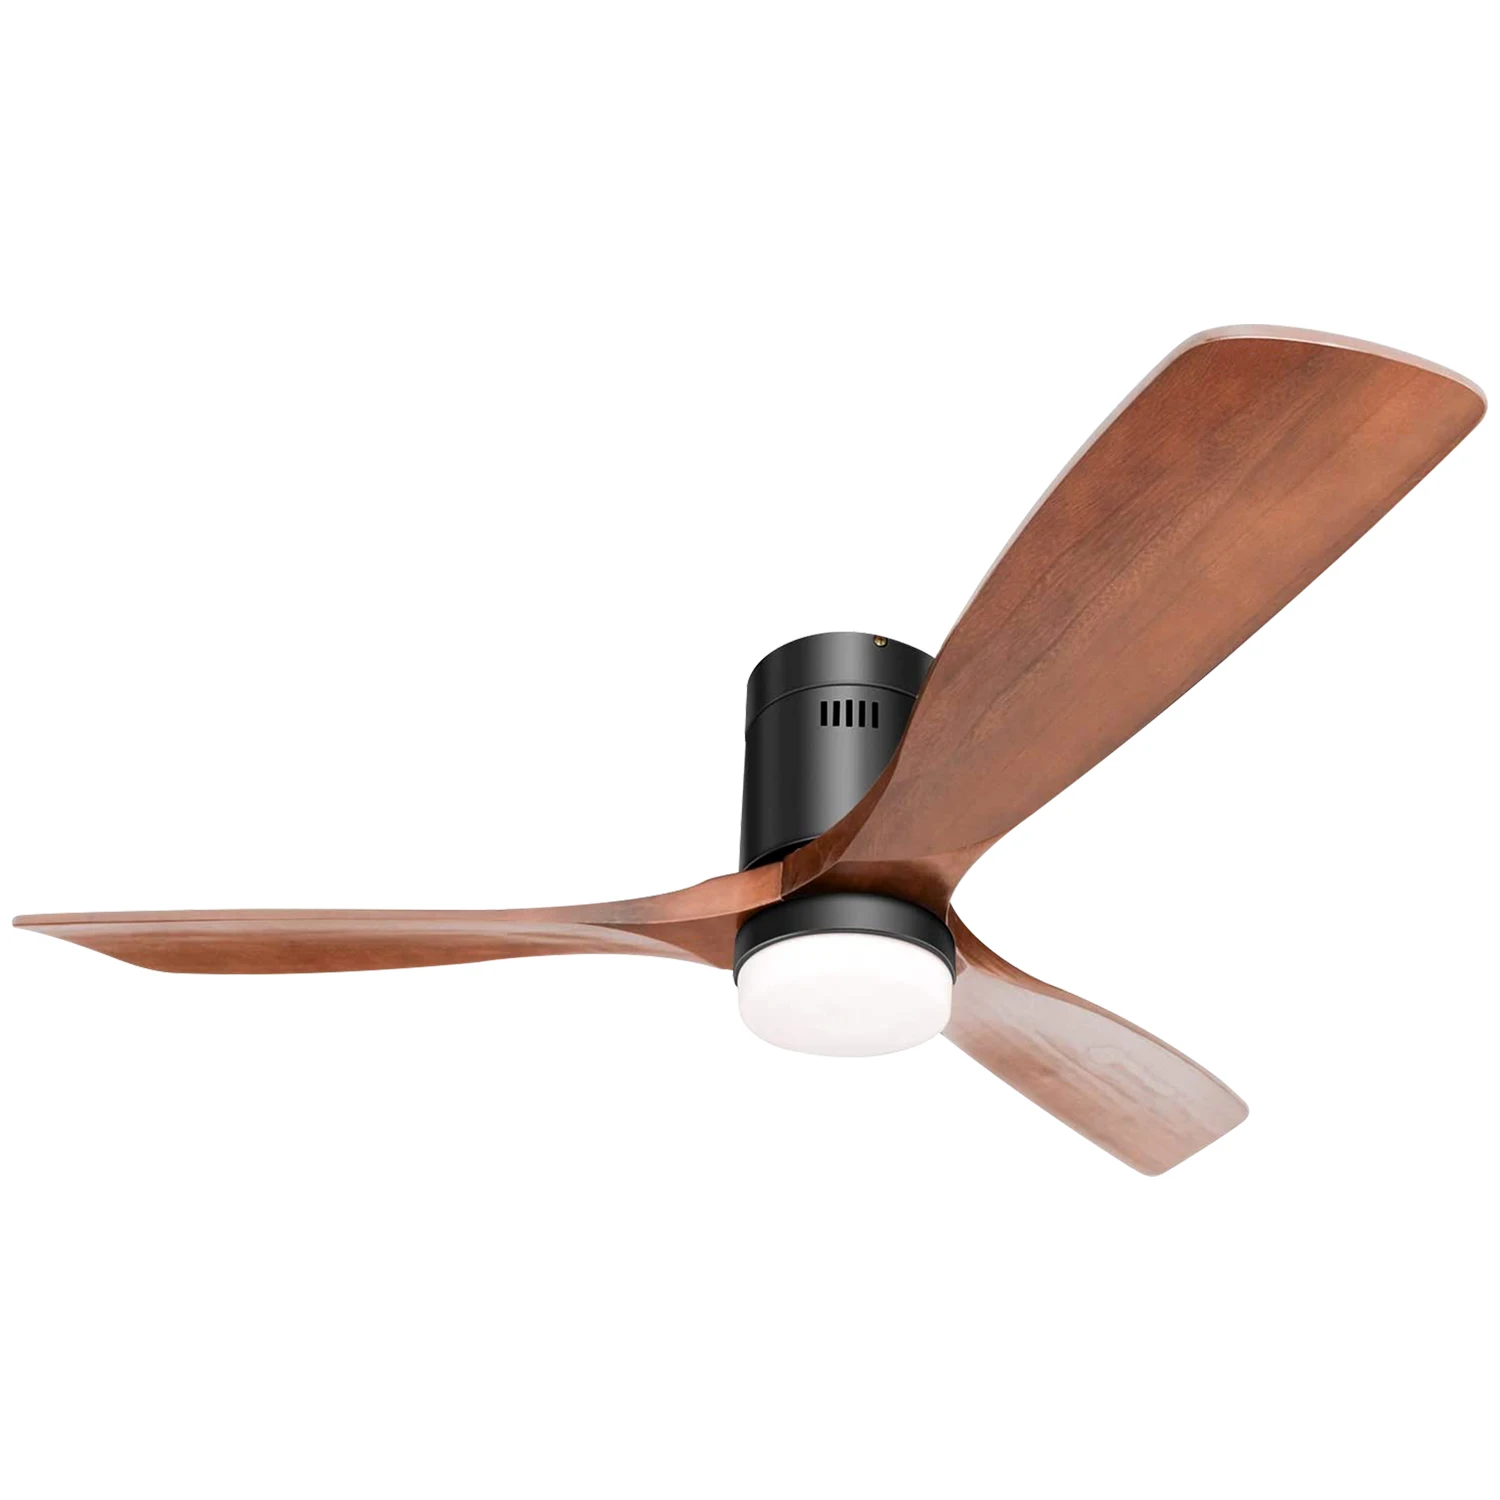 High quality antique ceiling fans 52 inch wood blade energy saving ceiling fan with 15W LED light